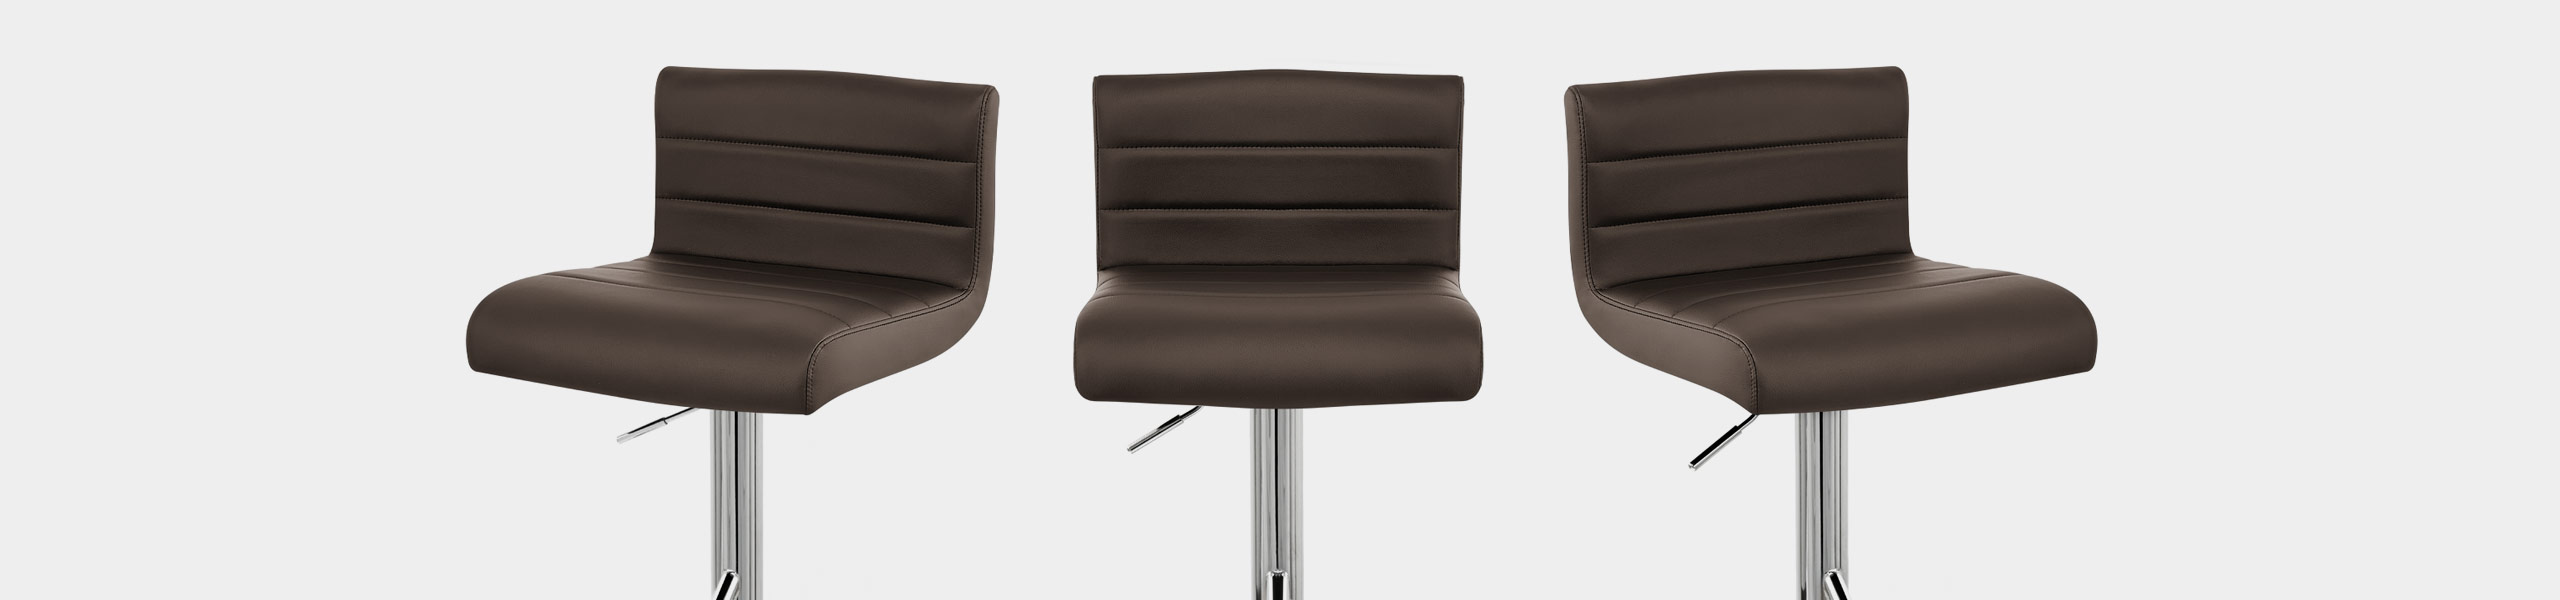 Style Bar Stool Brown Video Banner